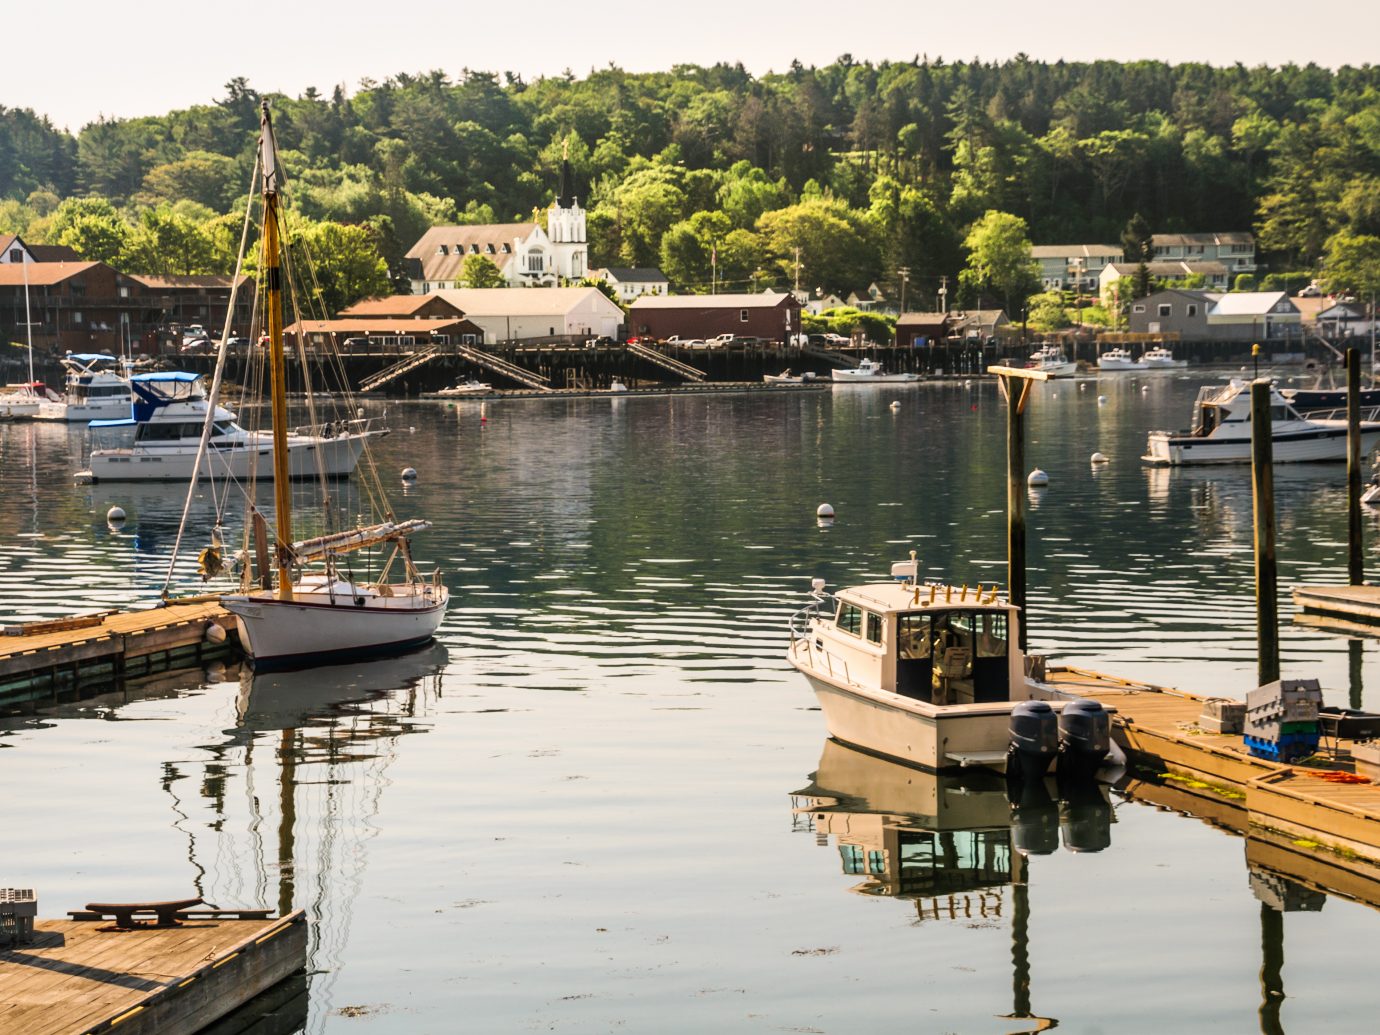 Morning light illuminates the boats in the waters of Boothbay Harbor, Maine in mid June.